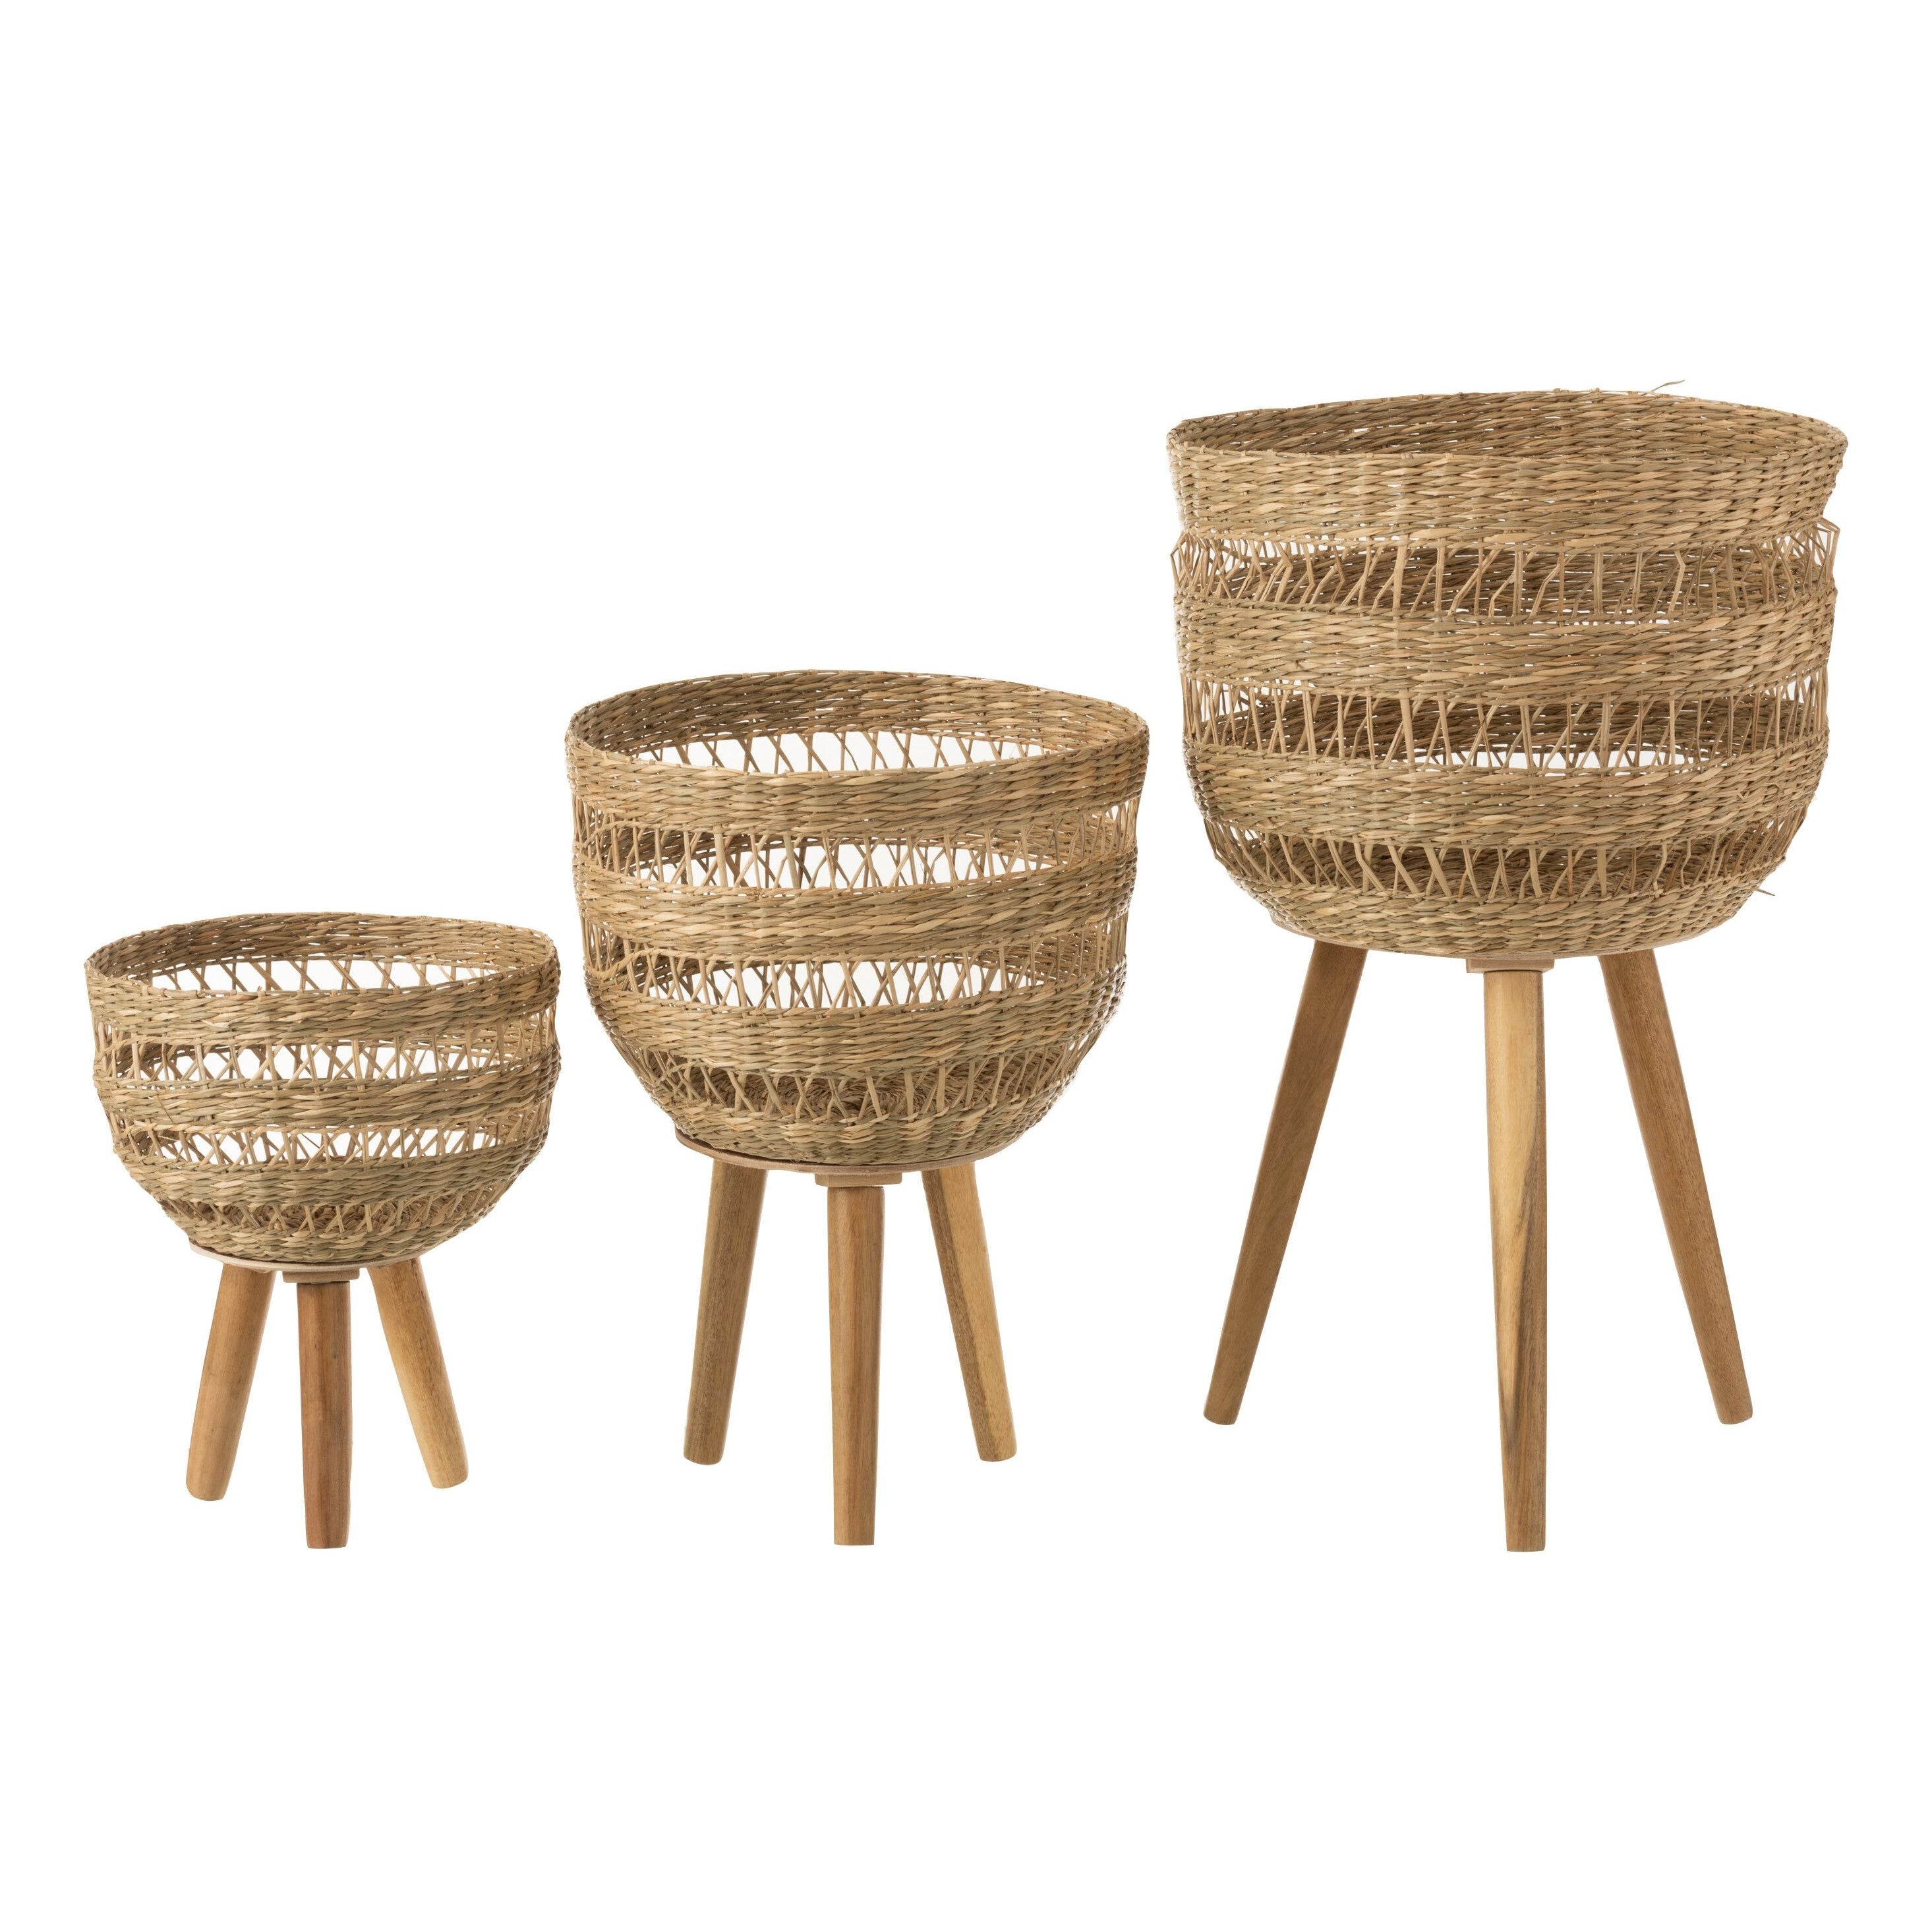 Baskets On Tripod Seagrass Natural